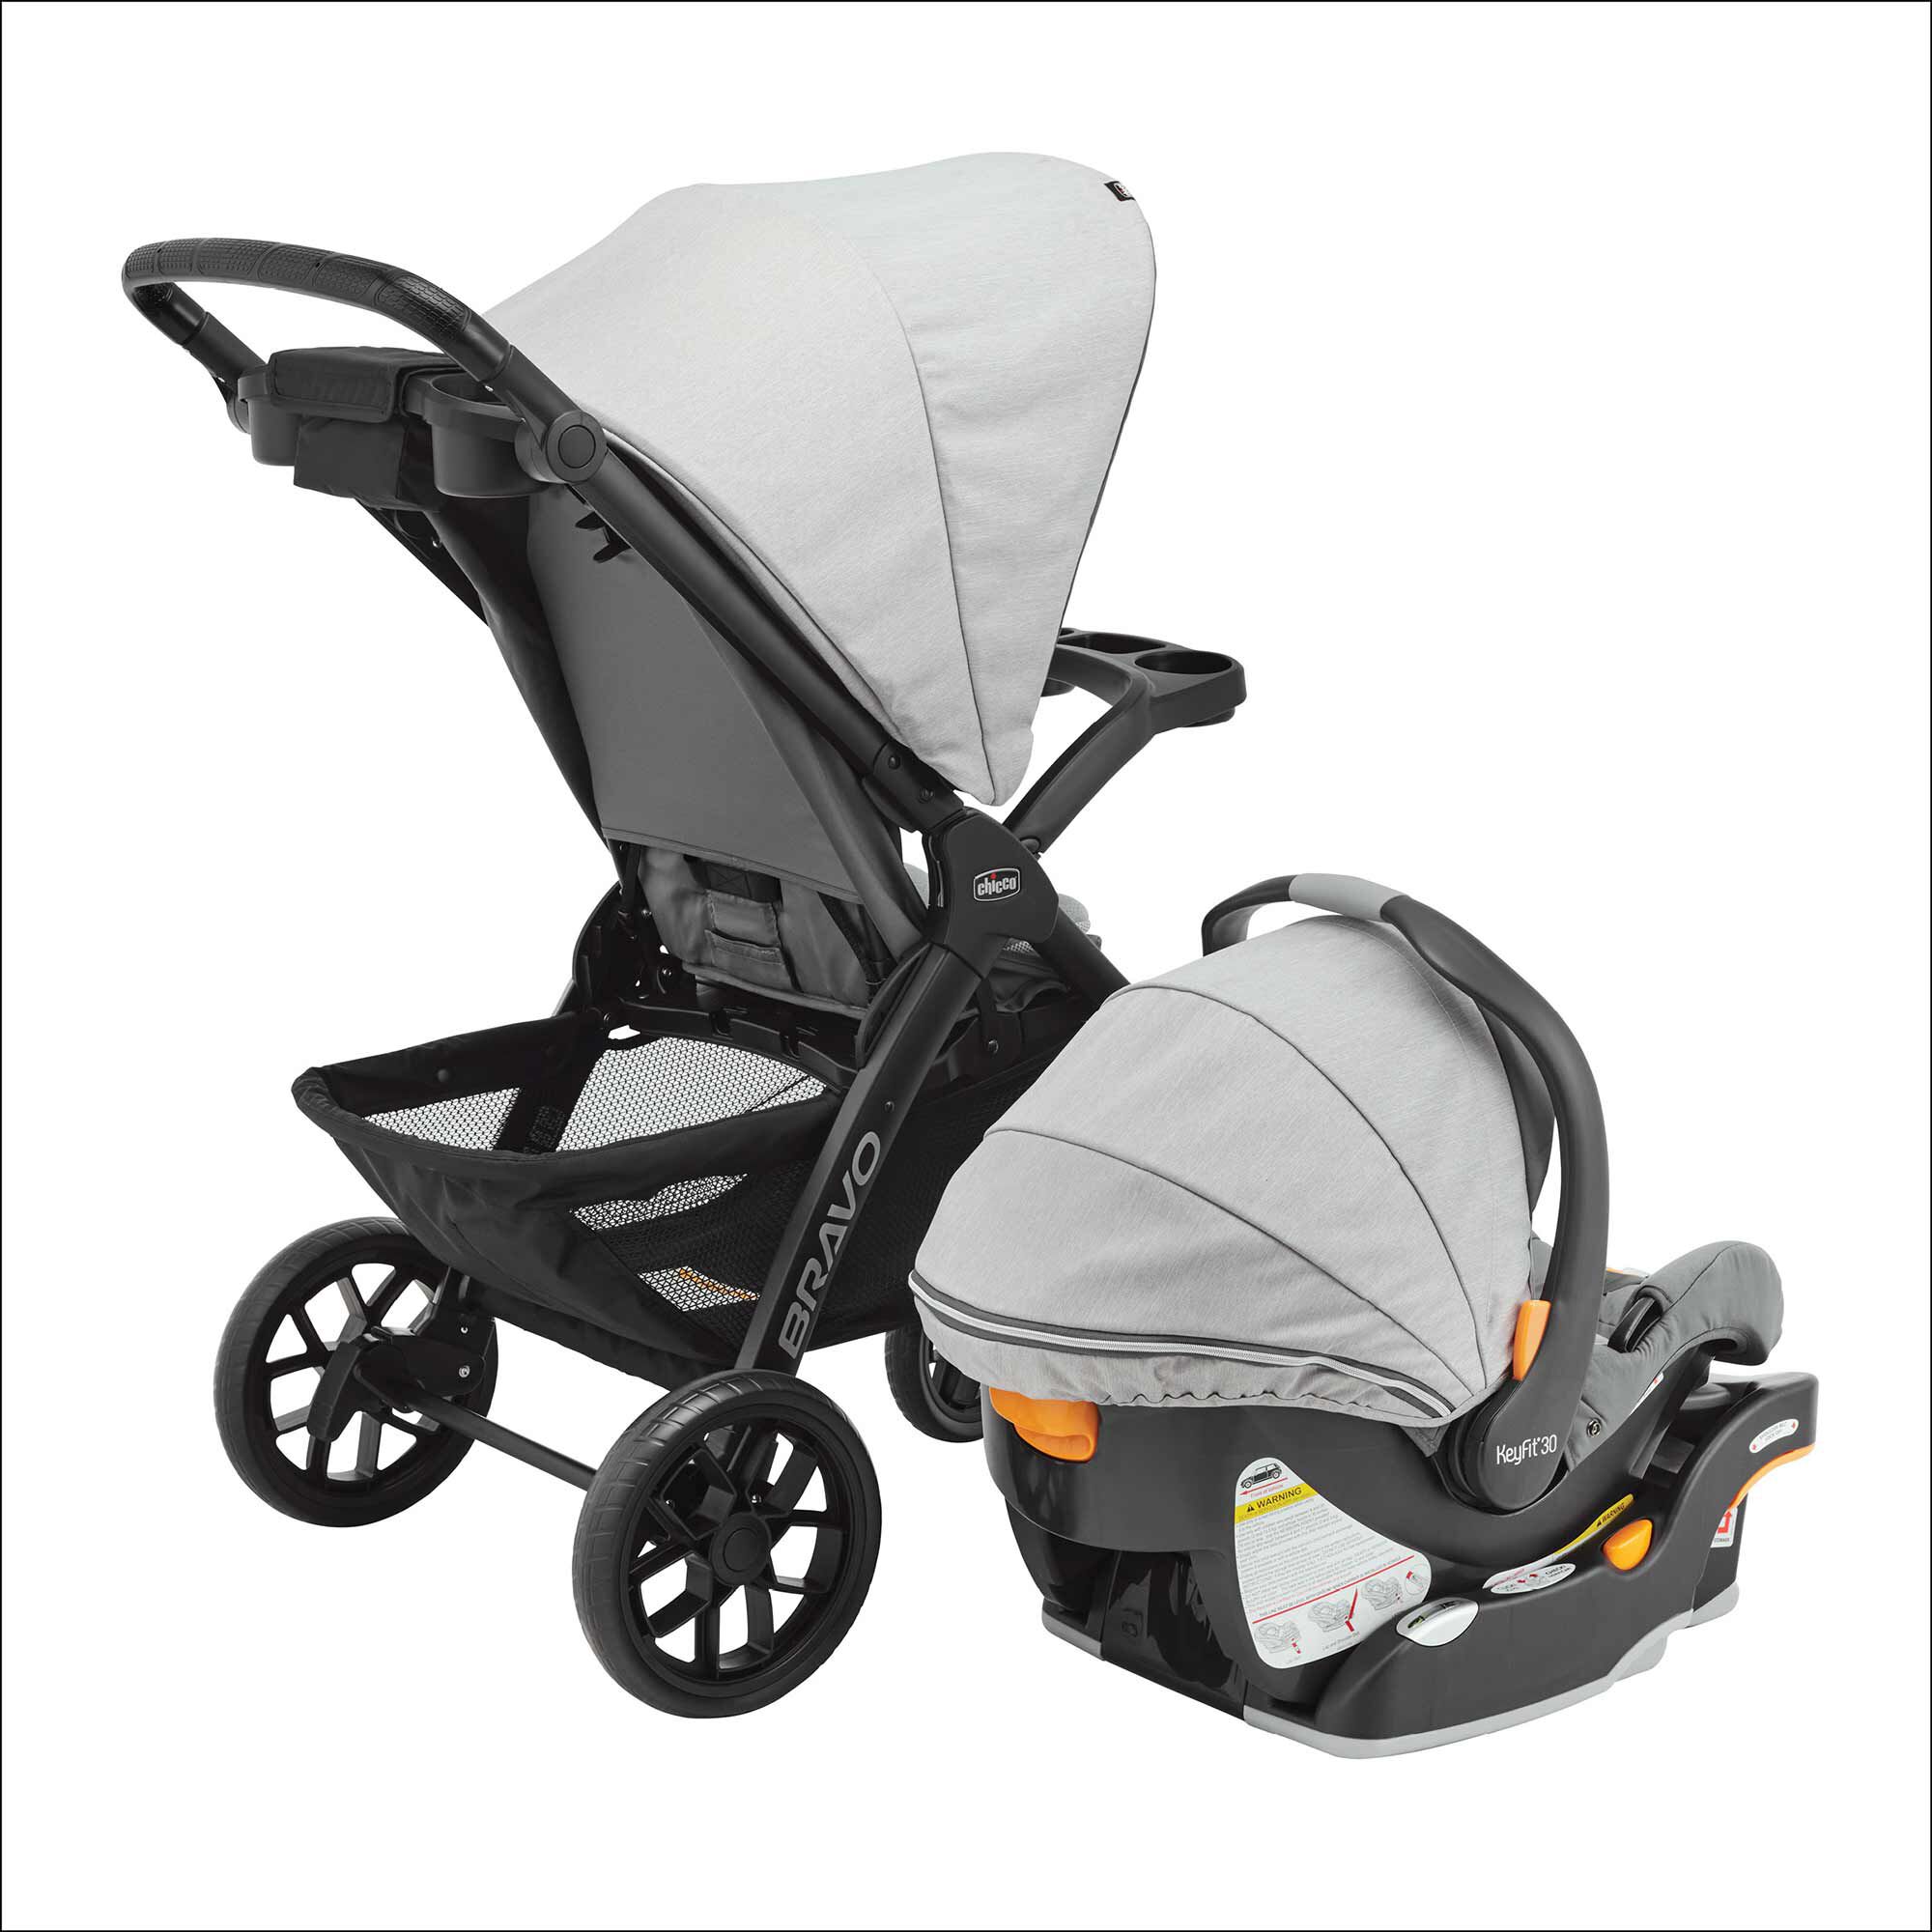 LE Travel Stroller - Driftwood Trio System | Bravo Chicco